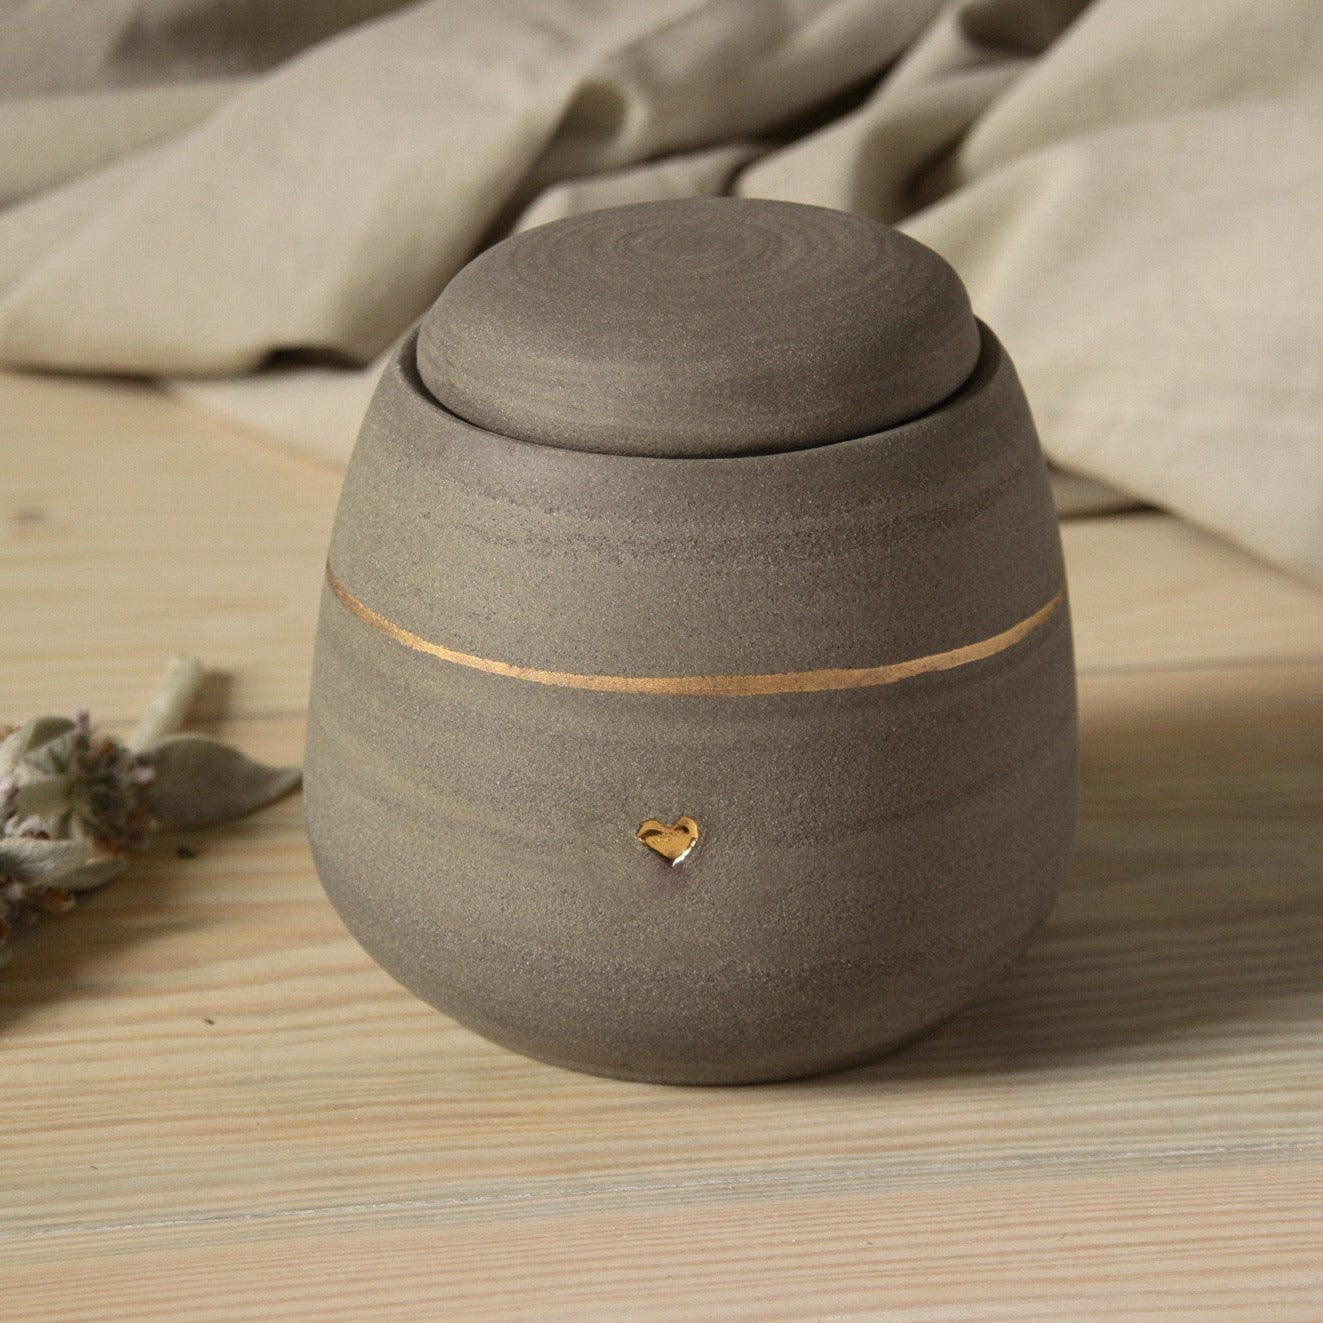 Handmade dog cremation urn - gray with gold paw stamp - custom name - honoring your loyal friend.